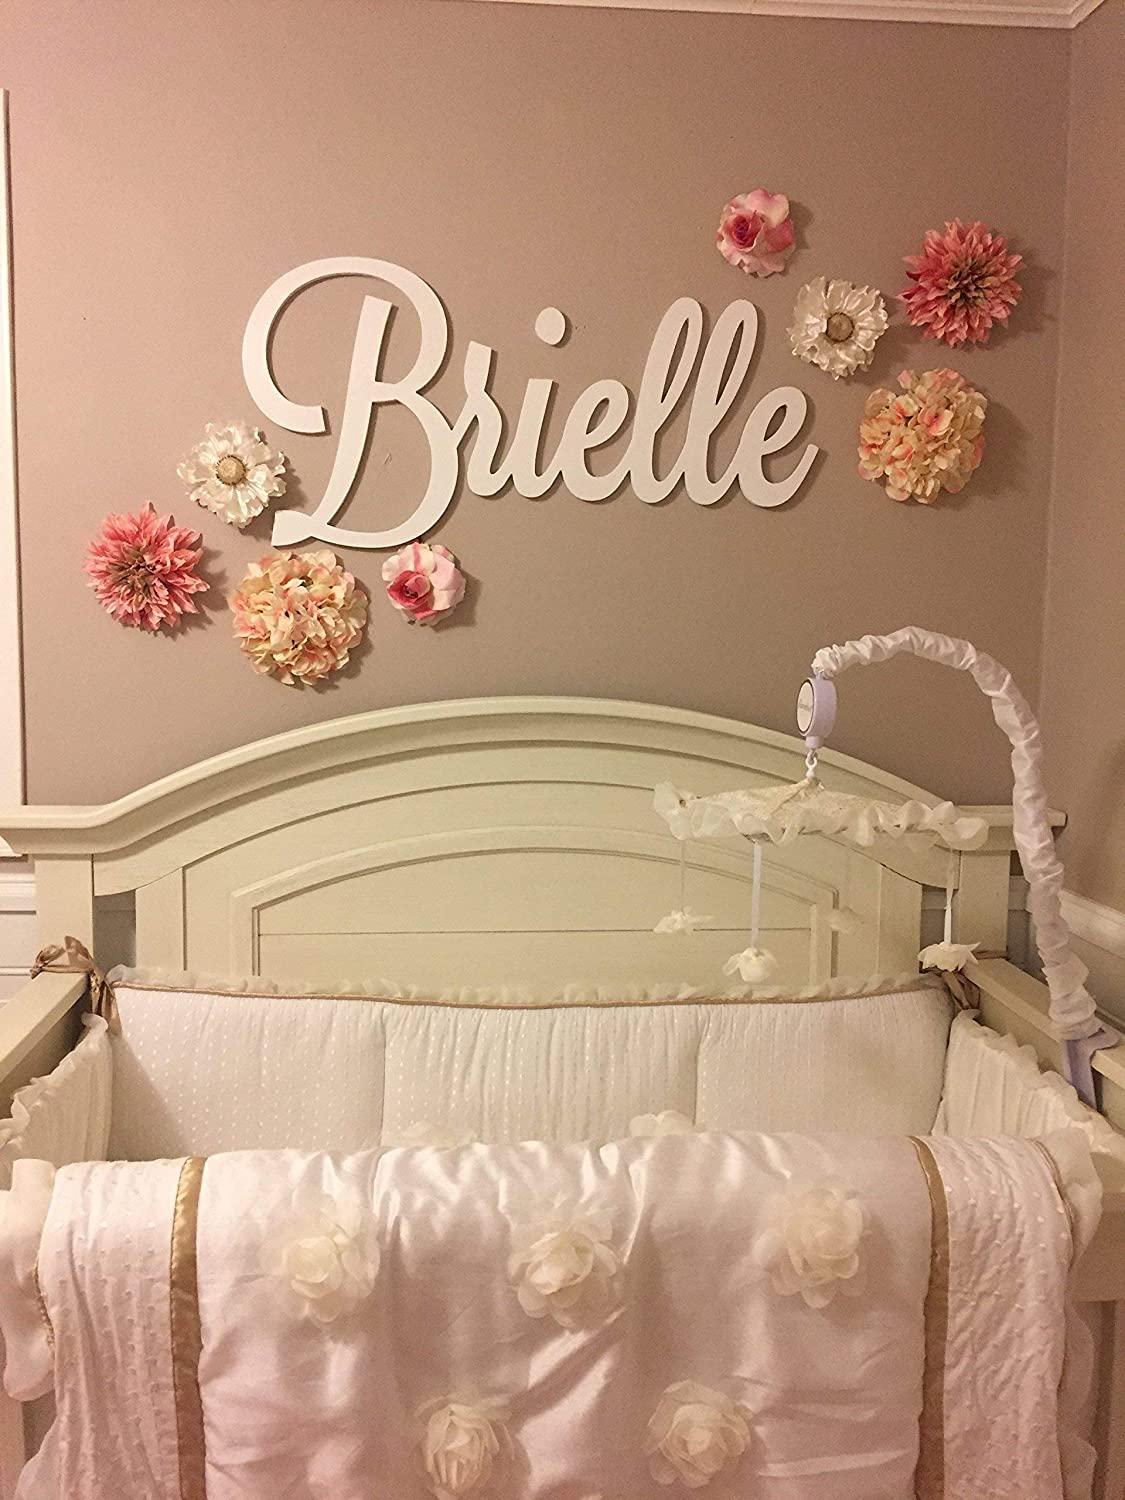 Personalized Wooden Name Sign Large size Letters Baby Name Plaque PAINTED nursery name nursery decor wall art